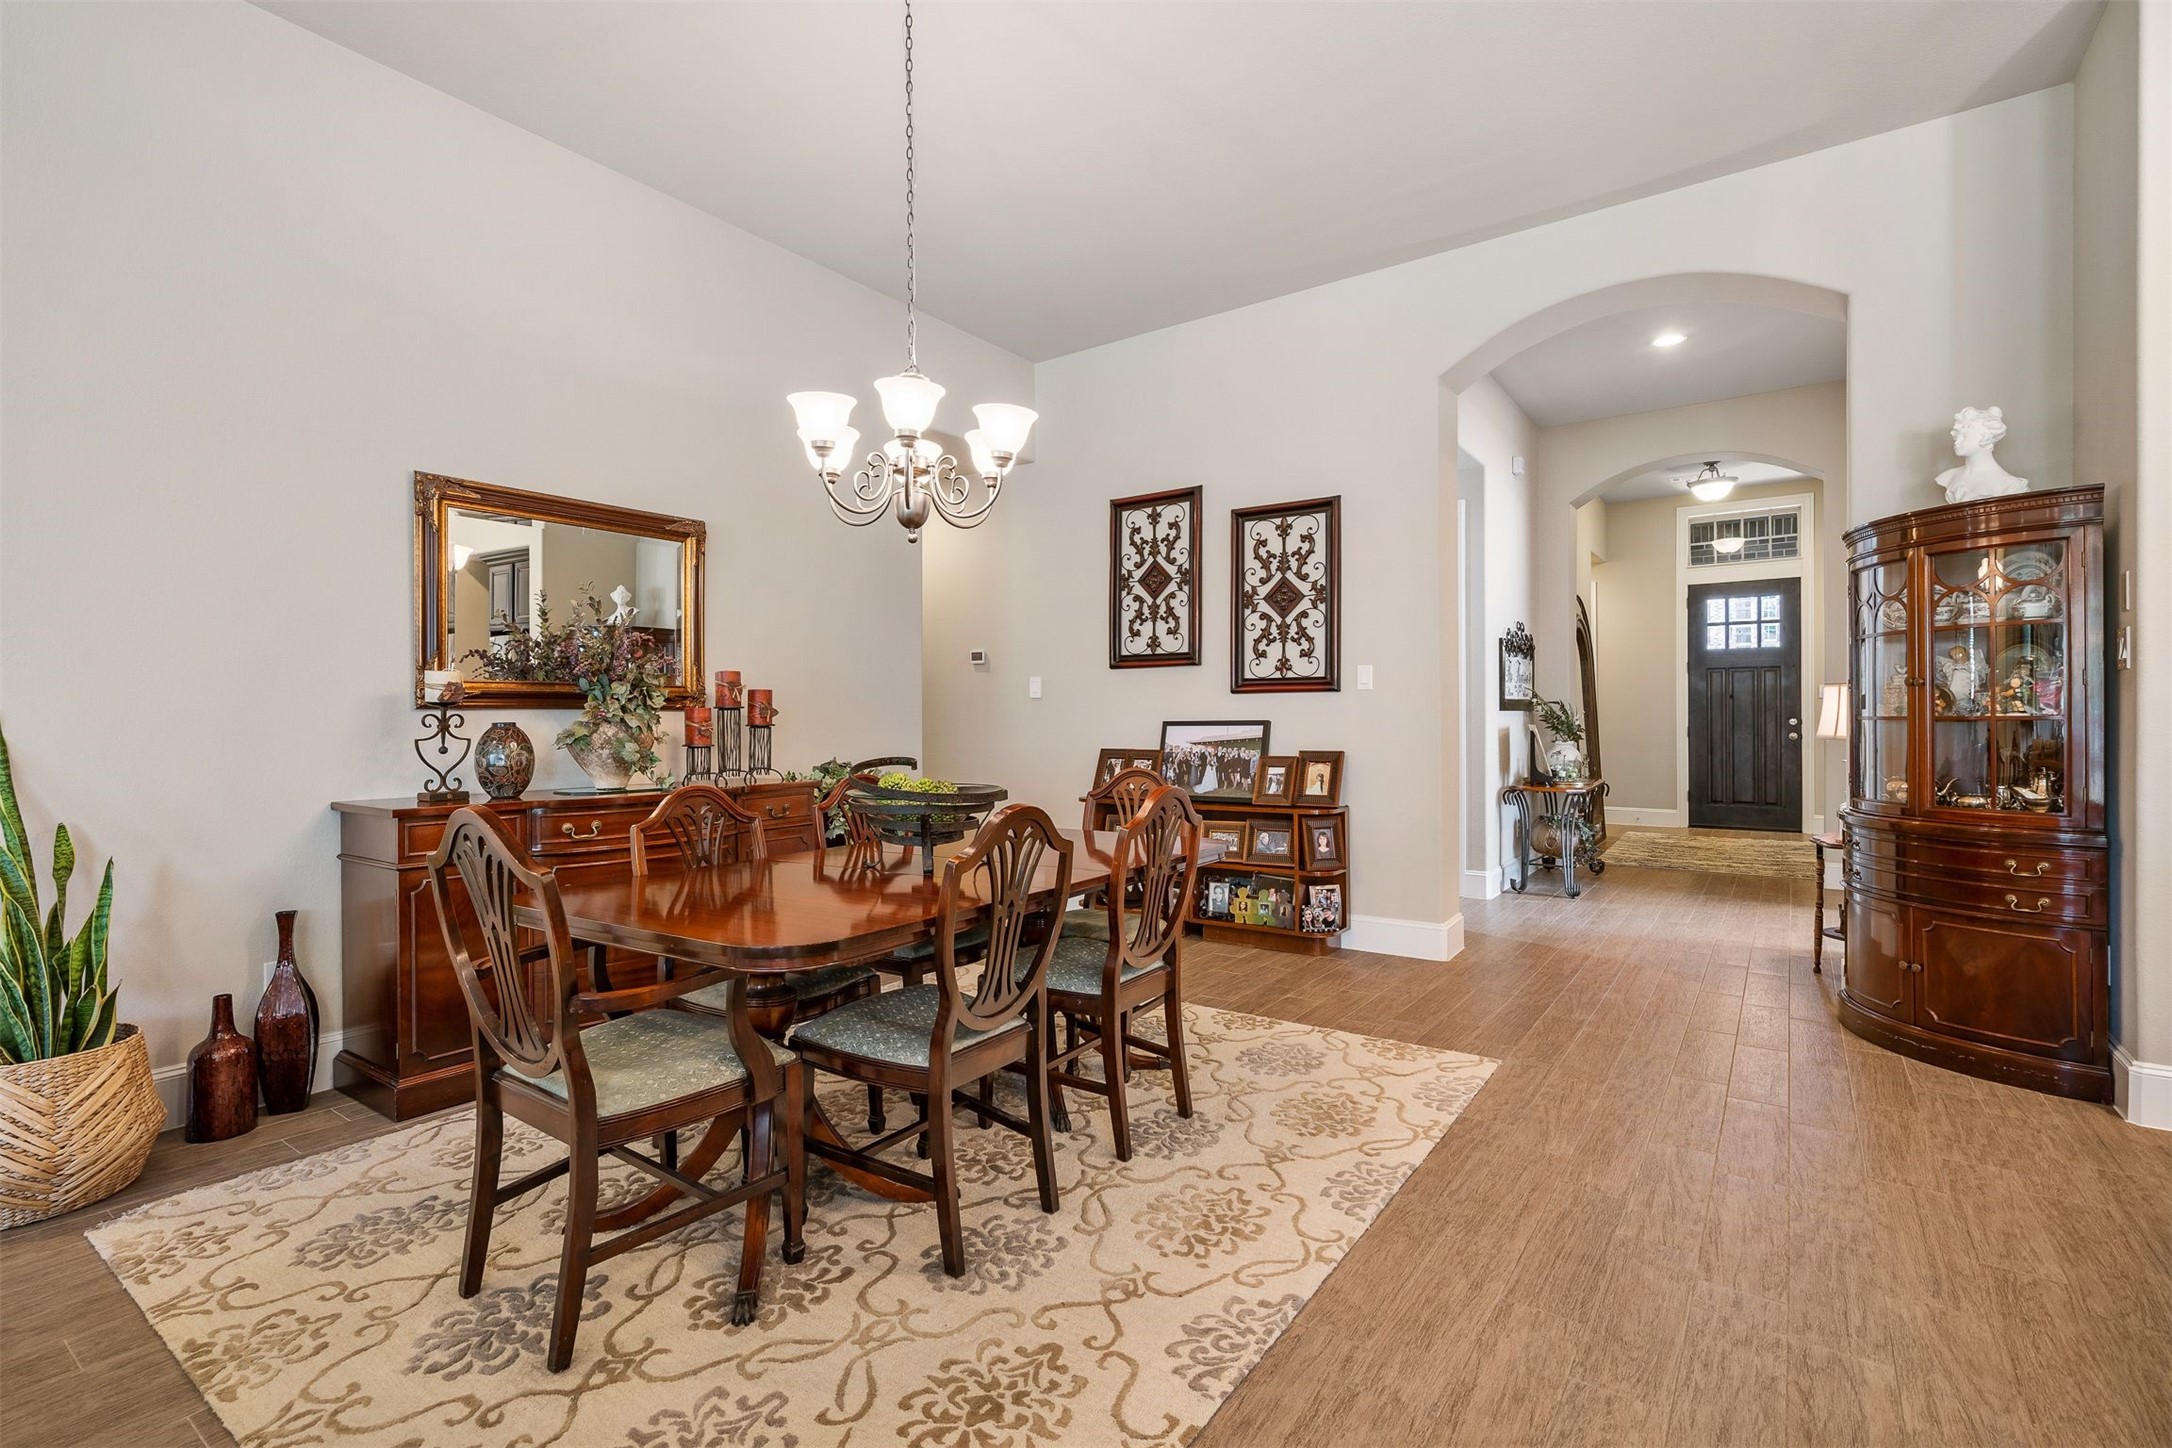 Formal dining area that is open to the kitchen and family room!